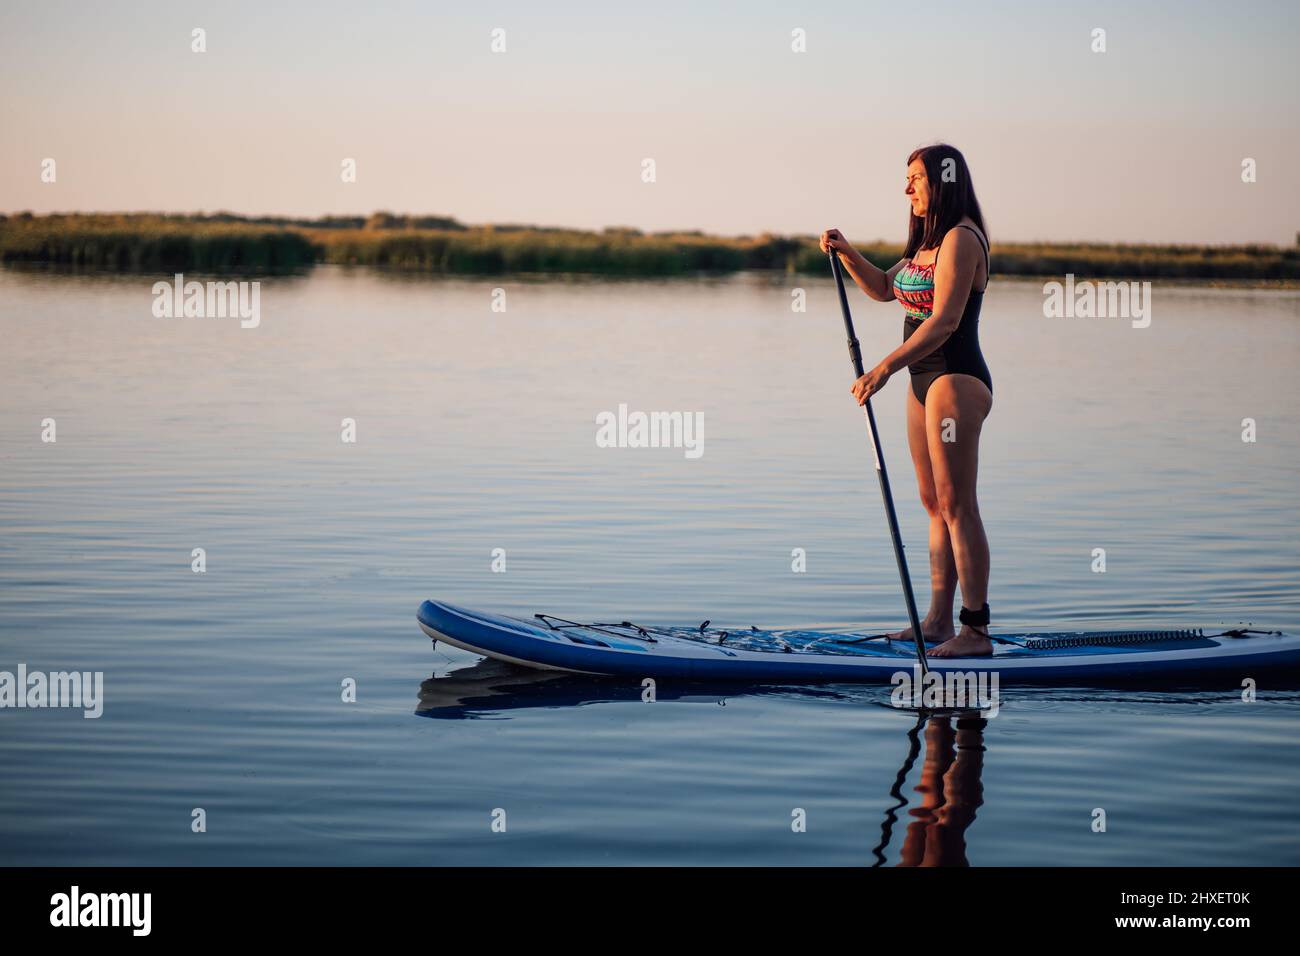 Lady of middle-age balancing on paddle board holding one oar in hands to steer board looking ahead on blue lake wearing swimming dress. Active Stock Photo